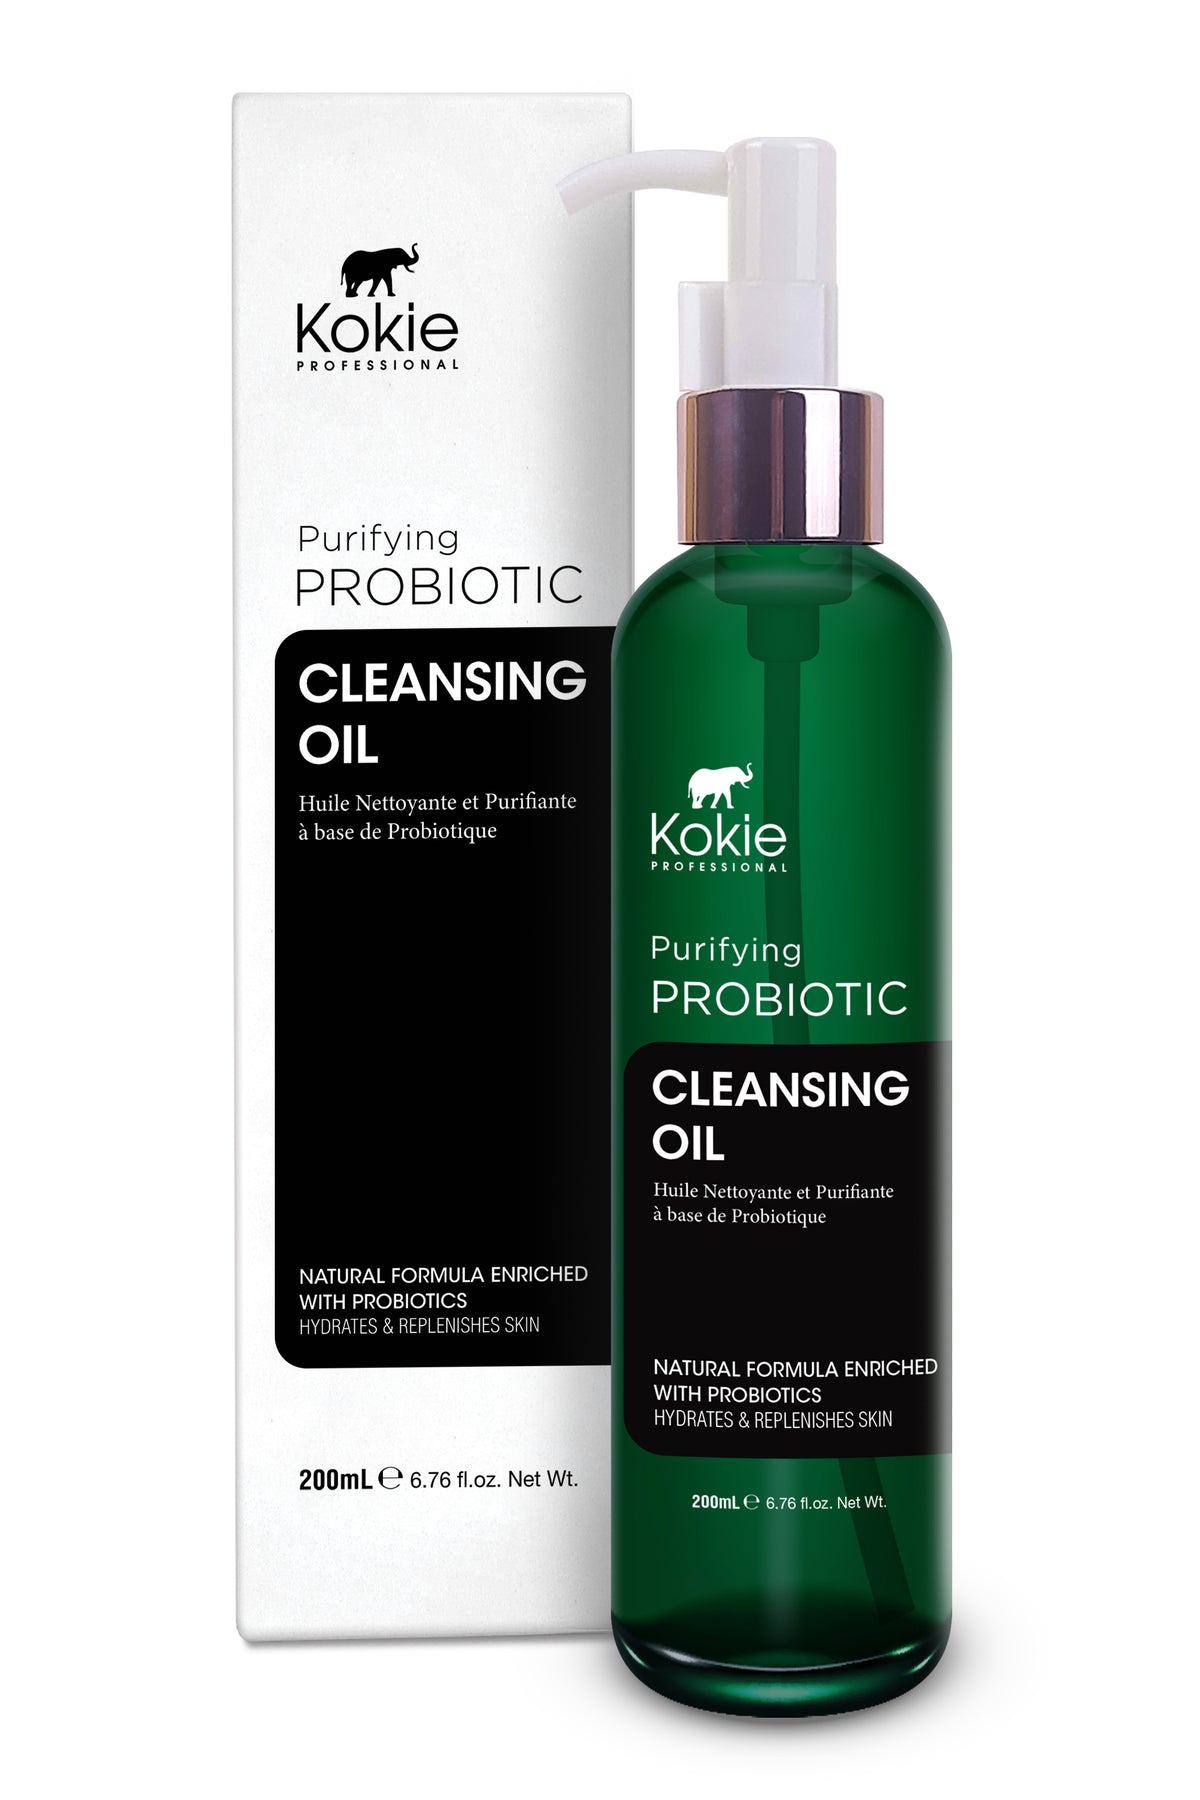 PURIFYING PROBIOTIC CLEANSING OIL